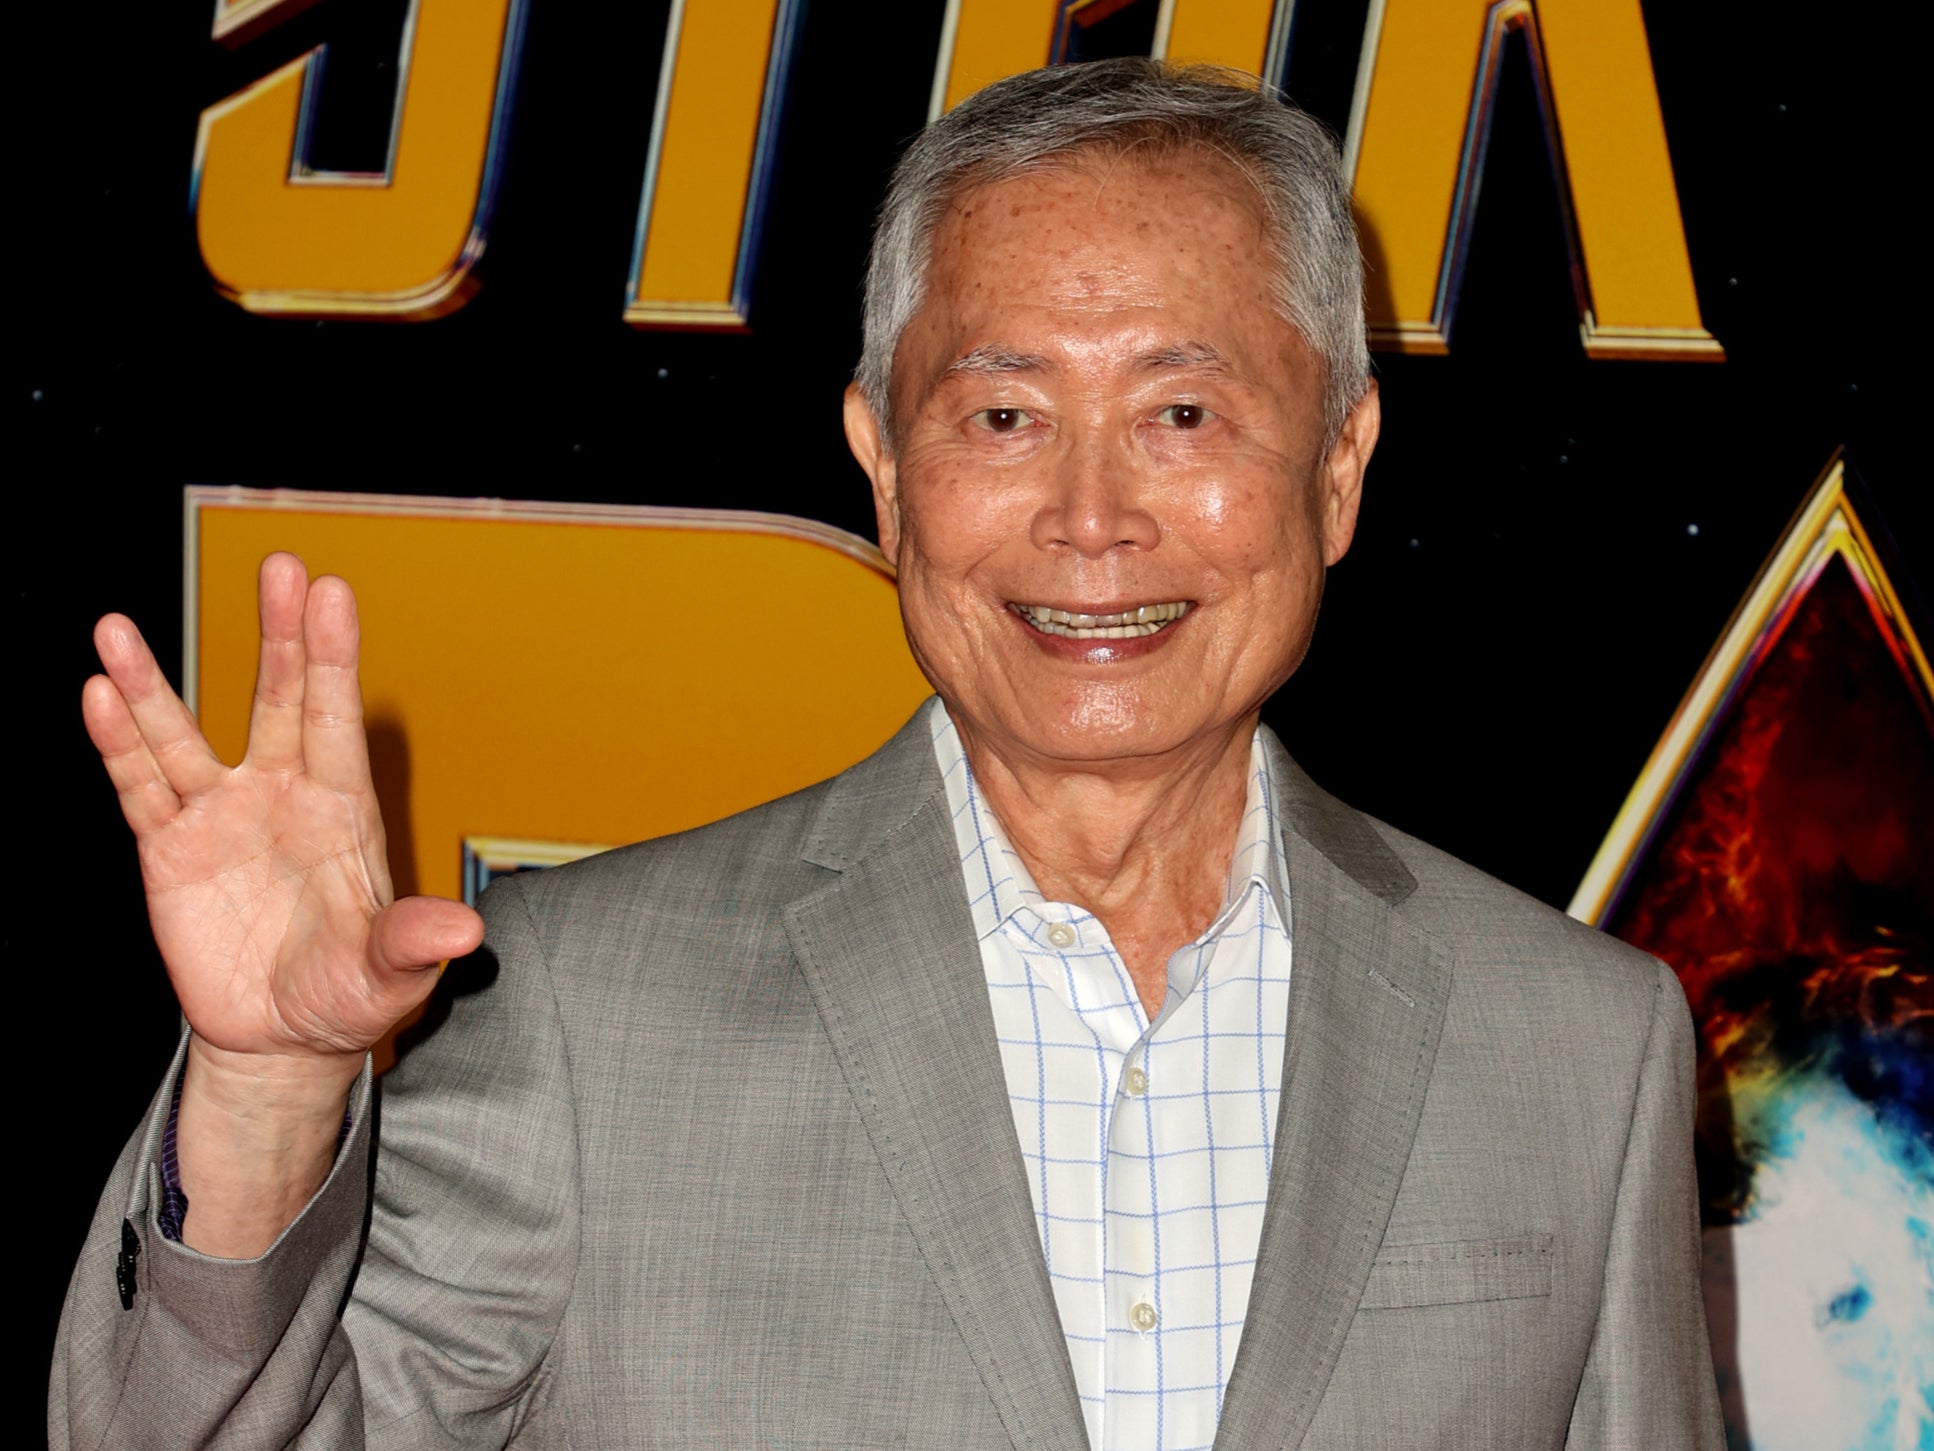 George Takei wrote “the struggle against fascism, misinformation, and hate requires tough fighters.”